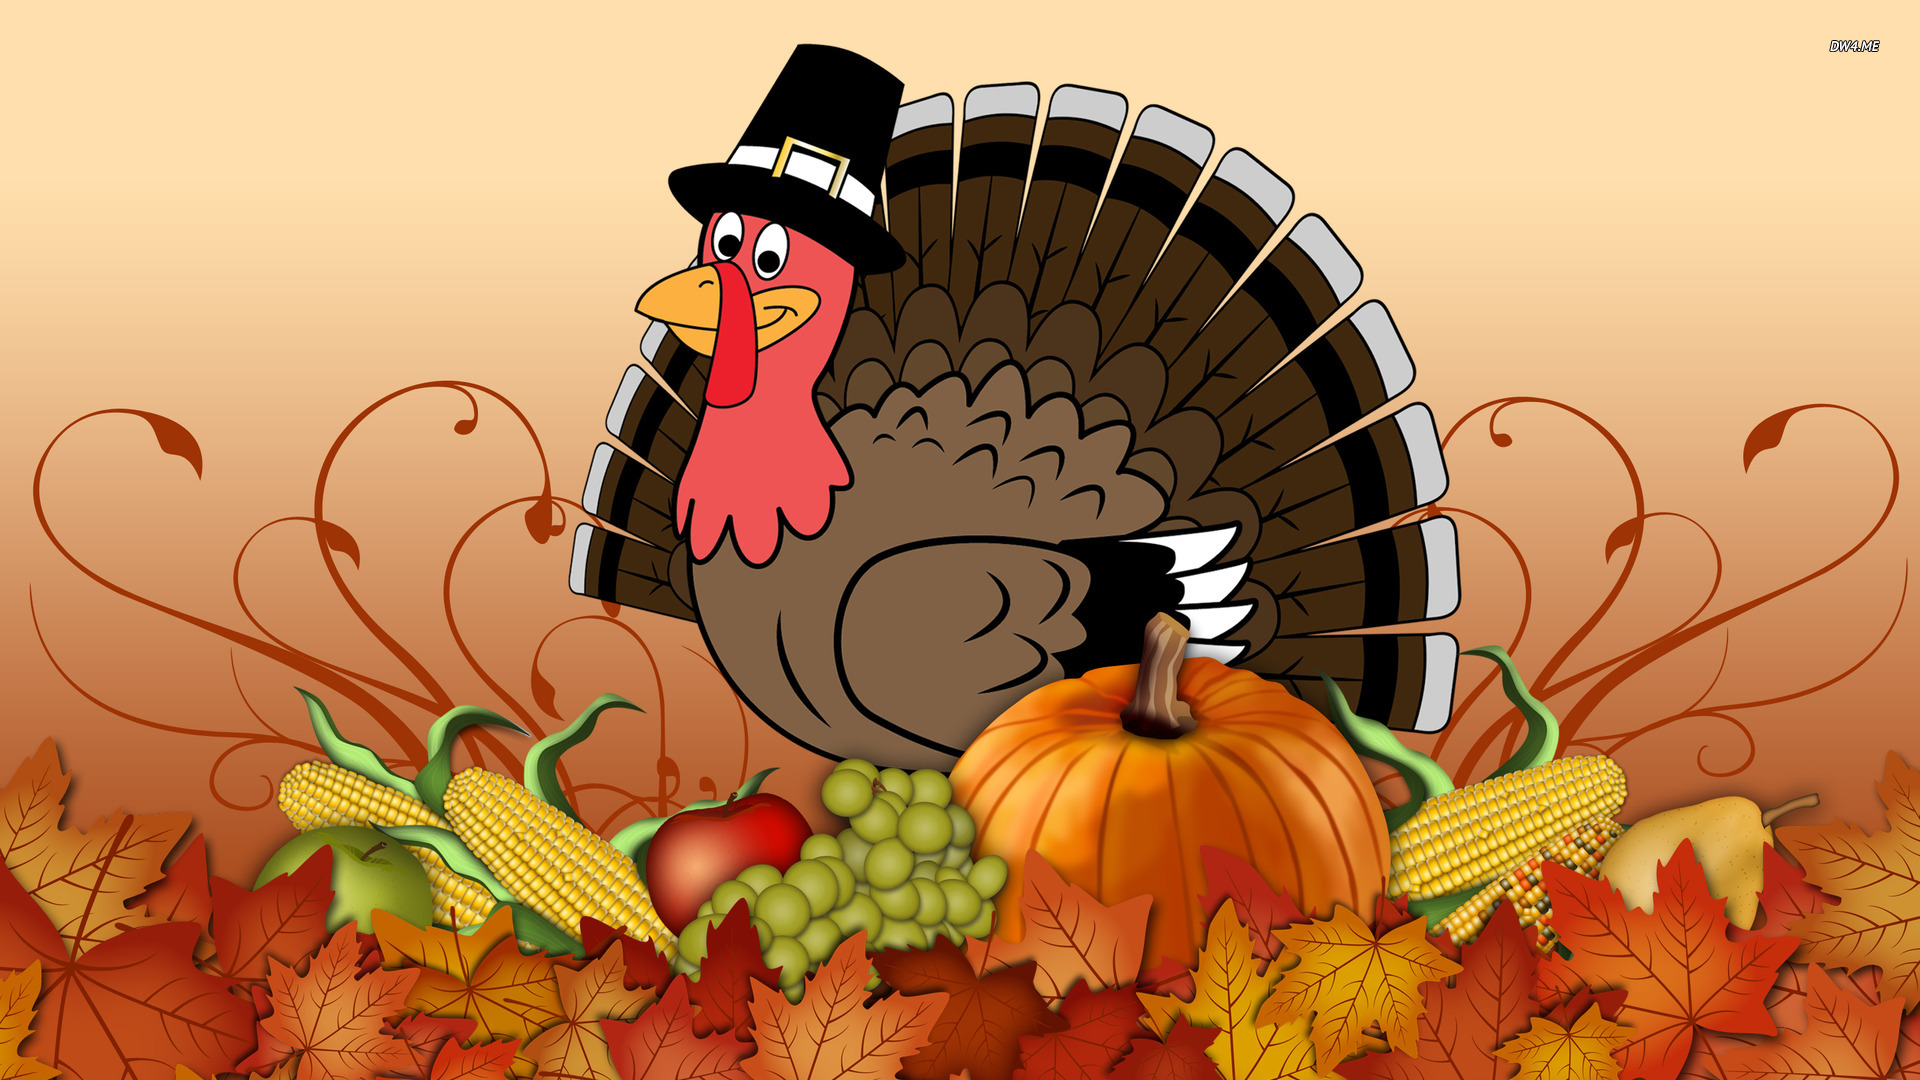 3d Live Wallpapers For Desktop Hd Free Download - Thanksgiving Wallpaper With Turkey - HD Wallpaper 